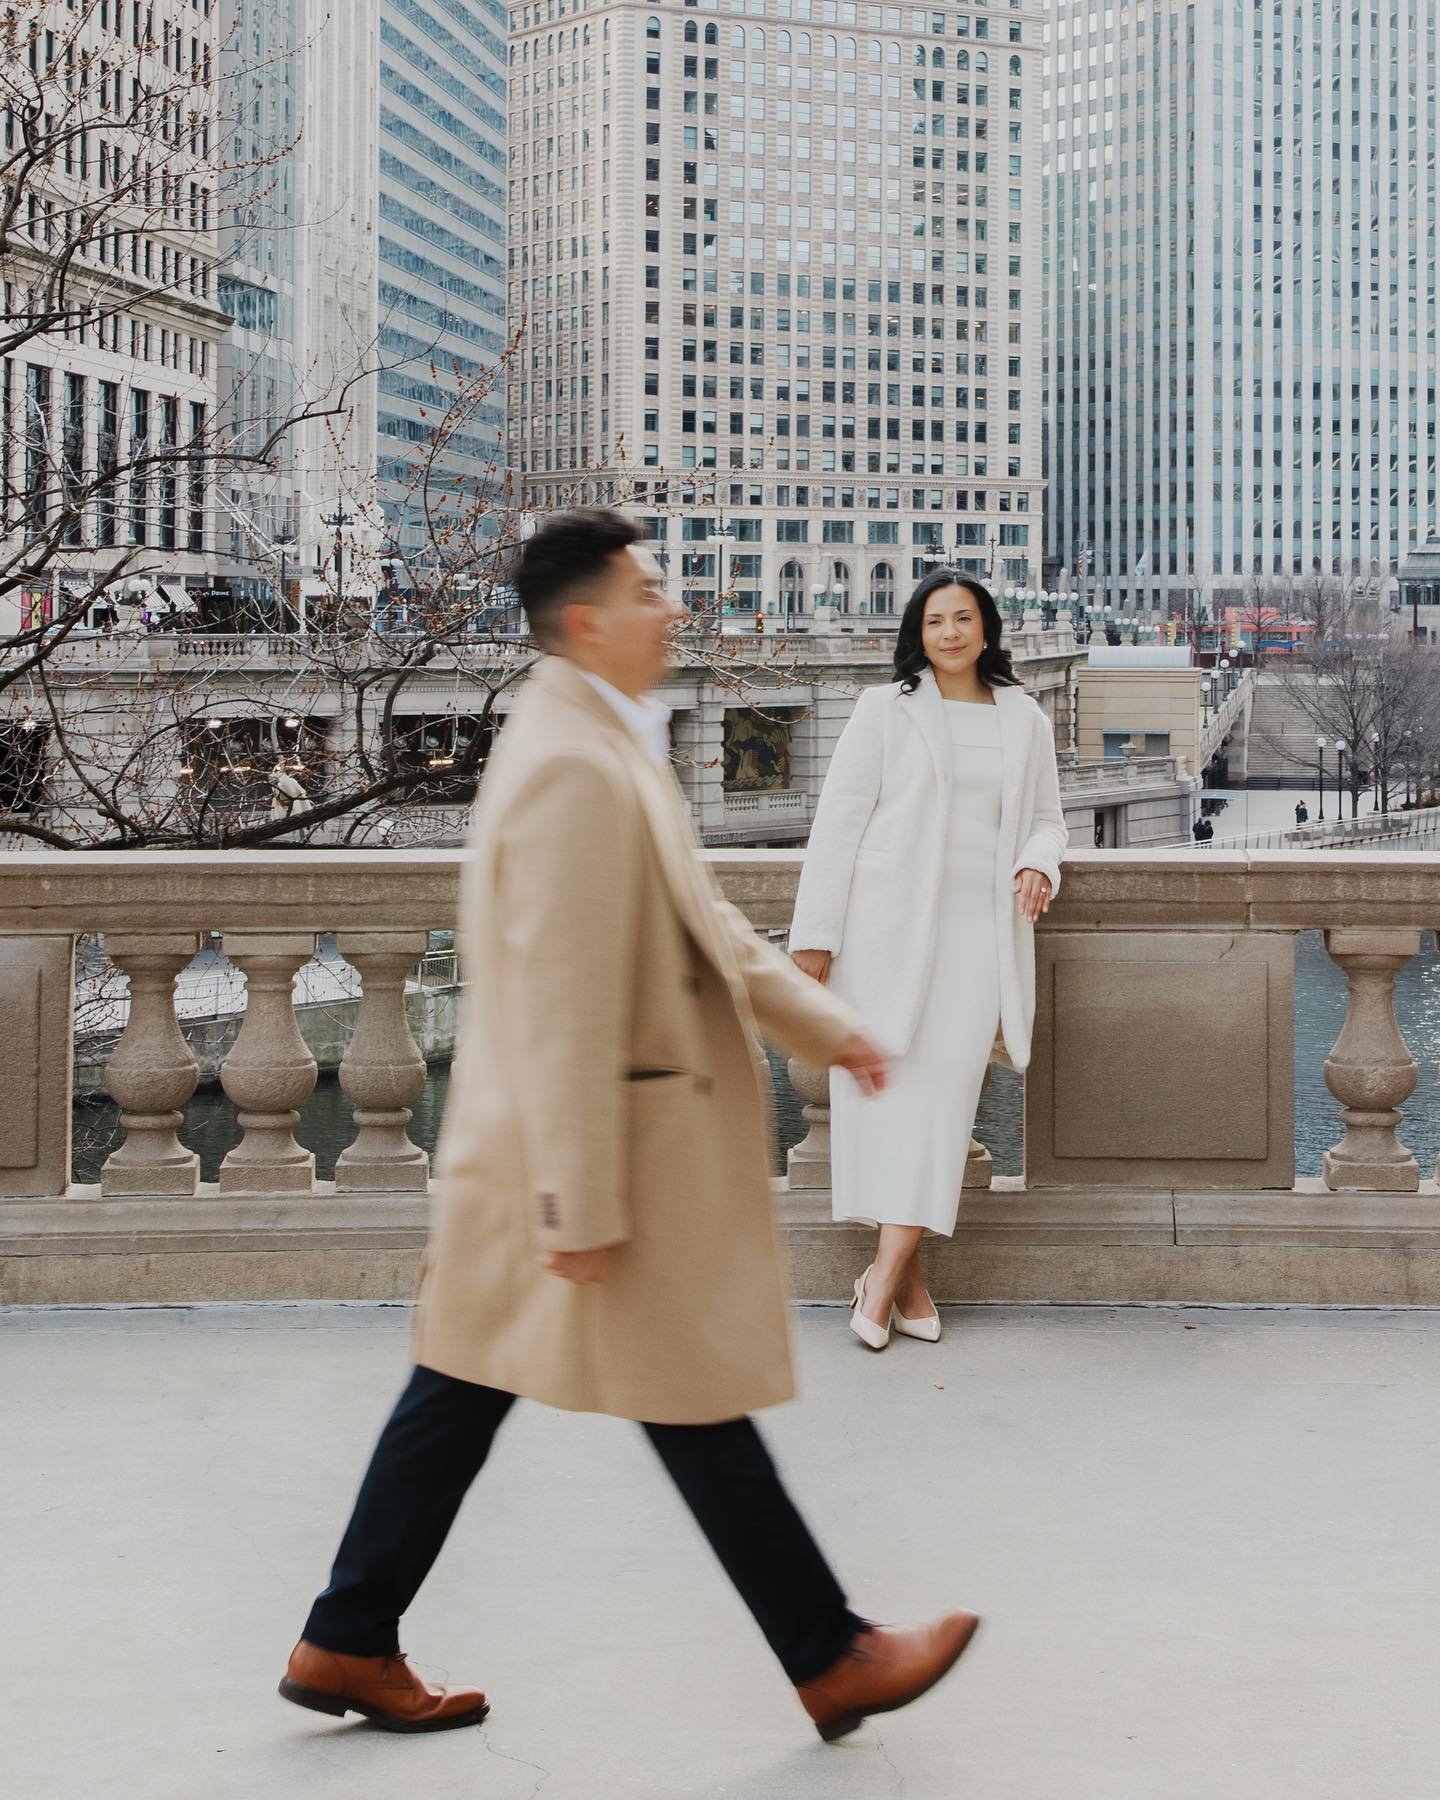 Christian and Alondra! Dreamiest engagement session in the city! I&rsquo;m absolutely obsessed with her white coat and their classy outfits 💛
*
*
*
Chicago Wedding photographer, Chicago photographer, West Michigan photographer, West Michigan wedding